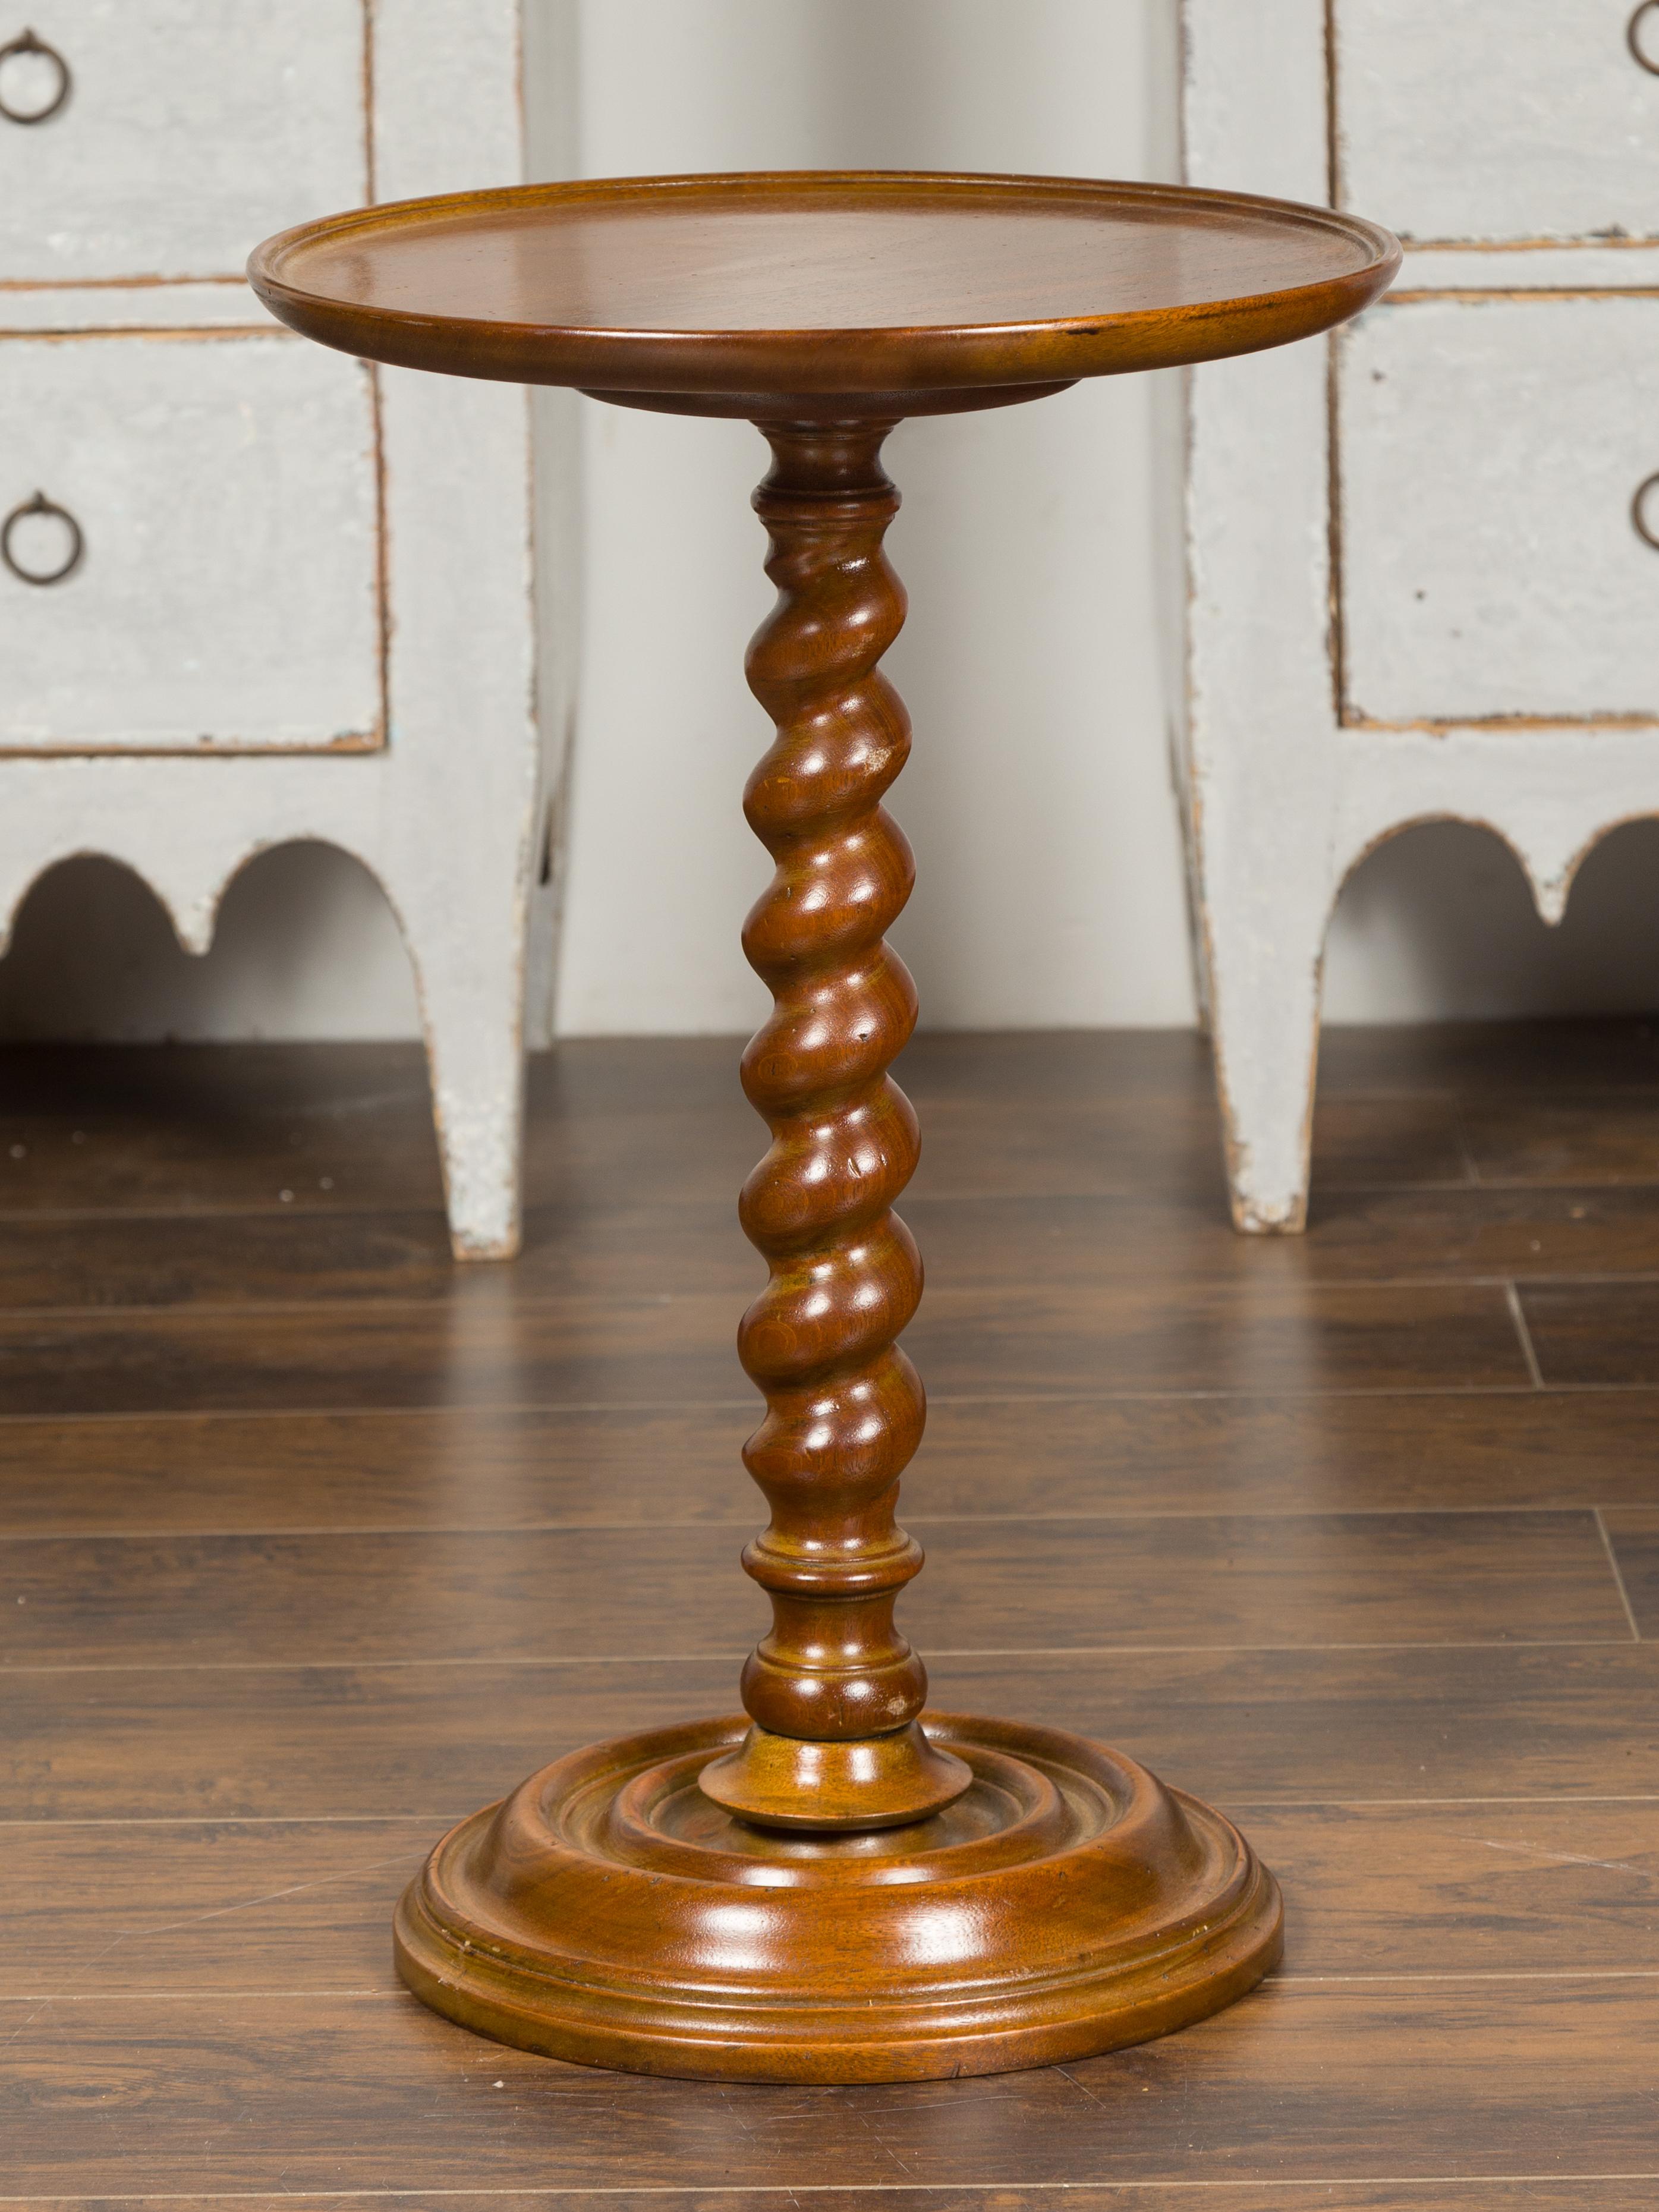 20th Century Vintage French Louis XIII Style Round Side Table with Barley Twist Pedestal Base